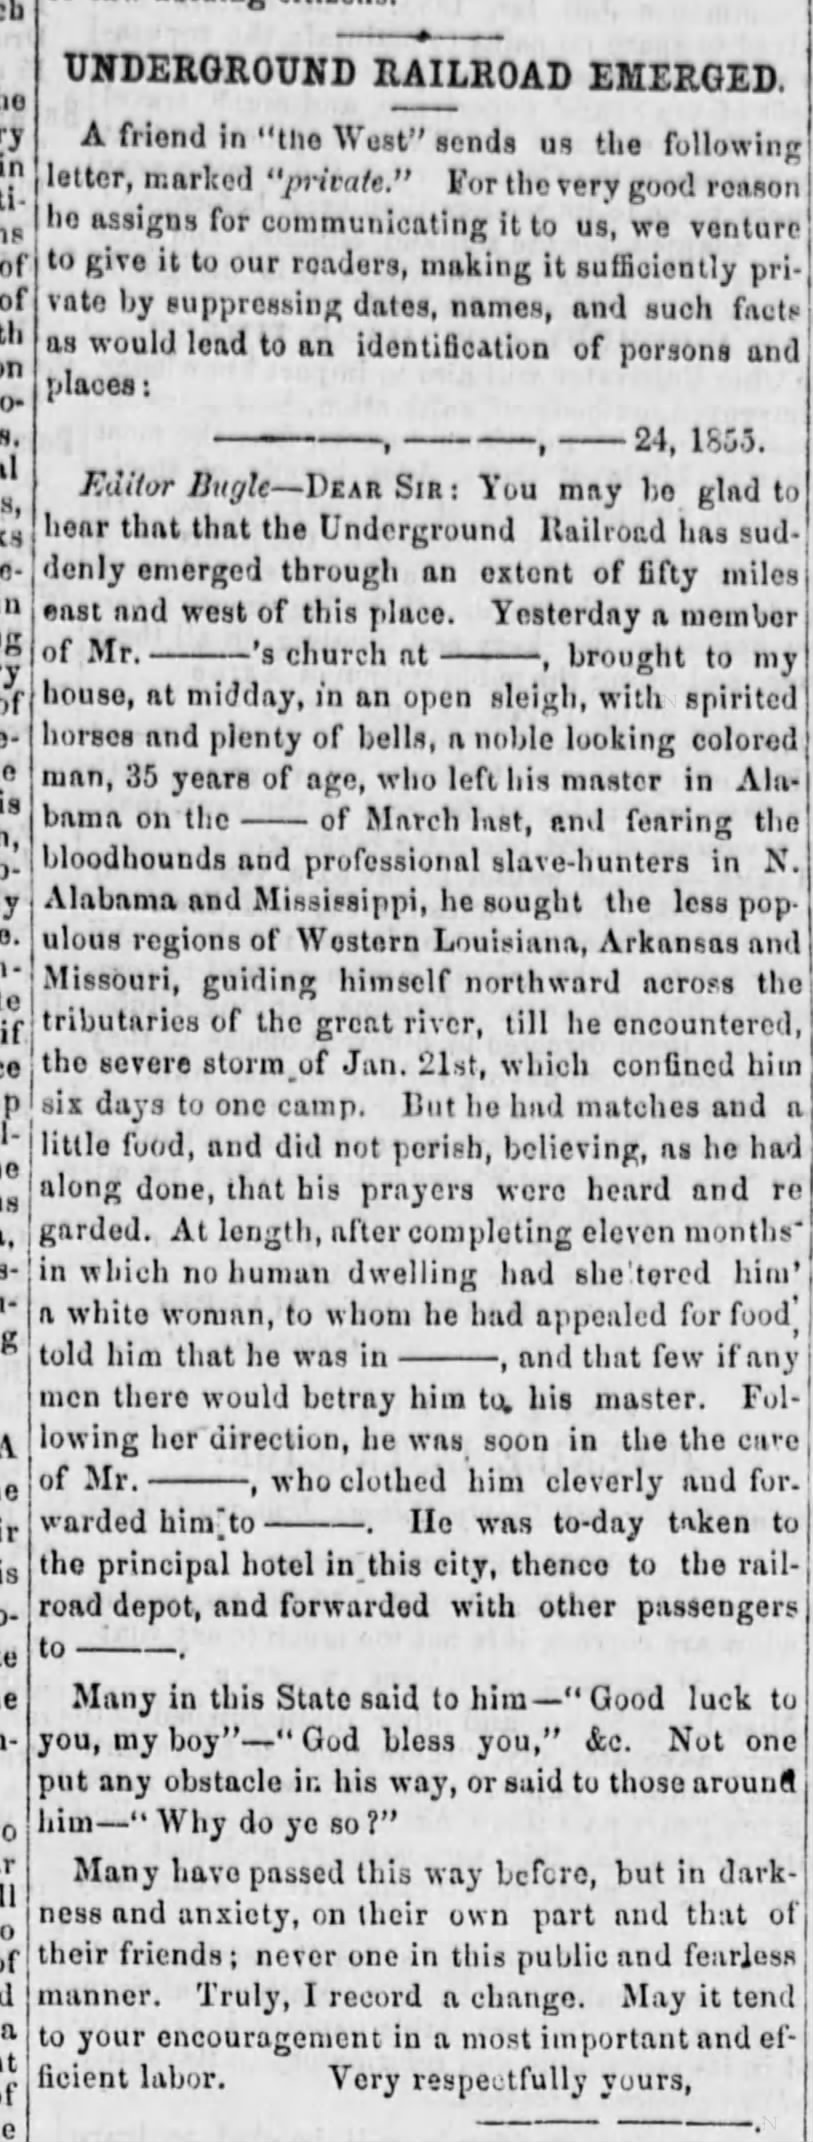 Letter recounting one man's escape from slavery; says Underground Railroad is expanding, 1855